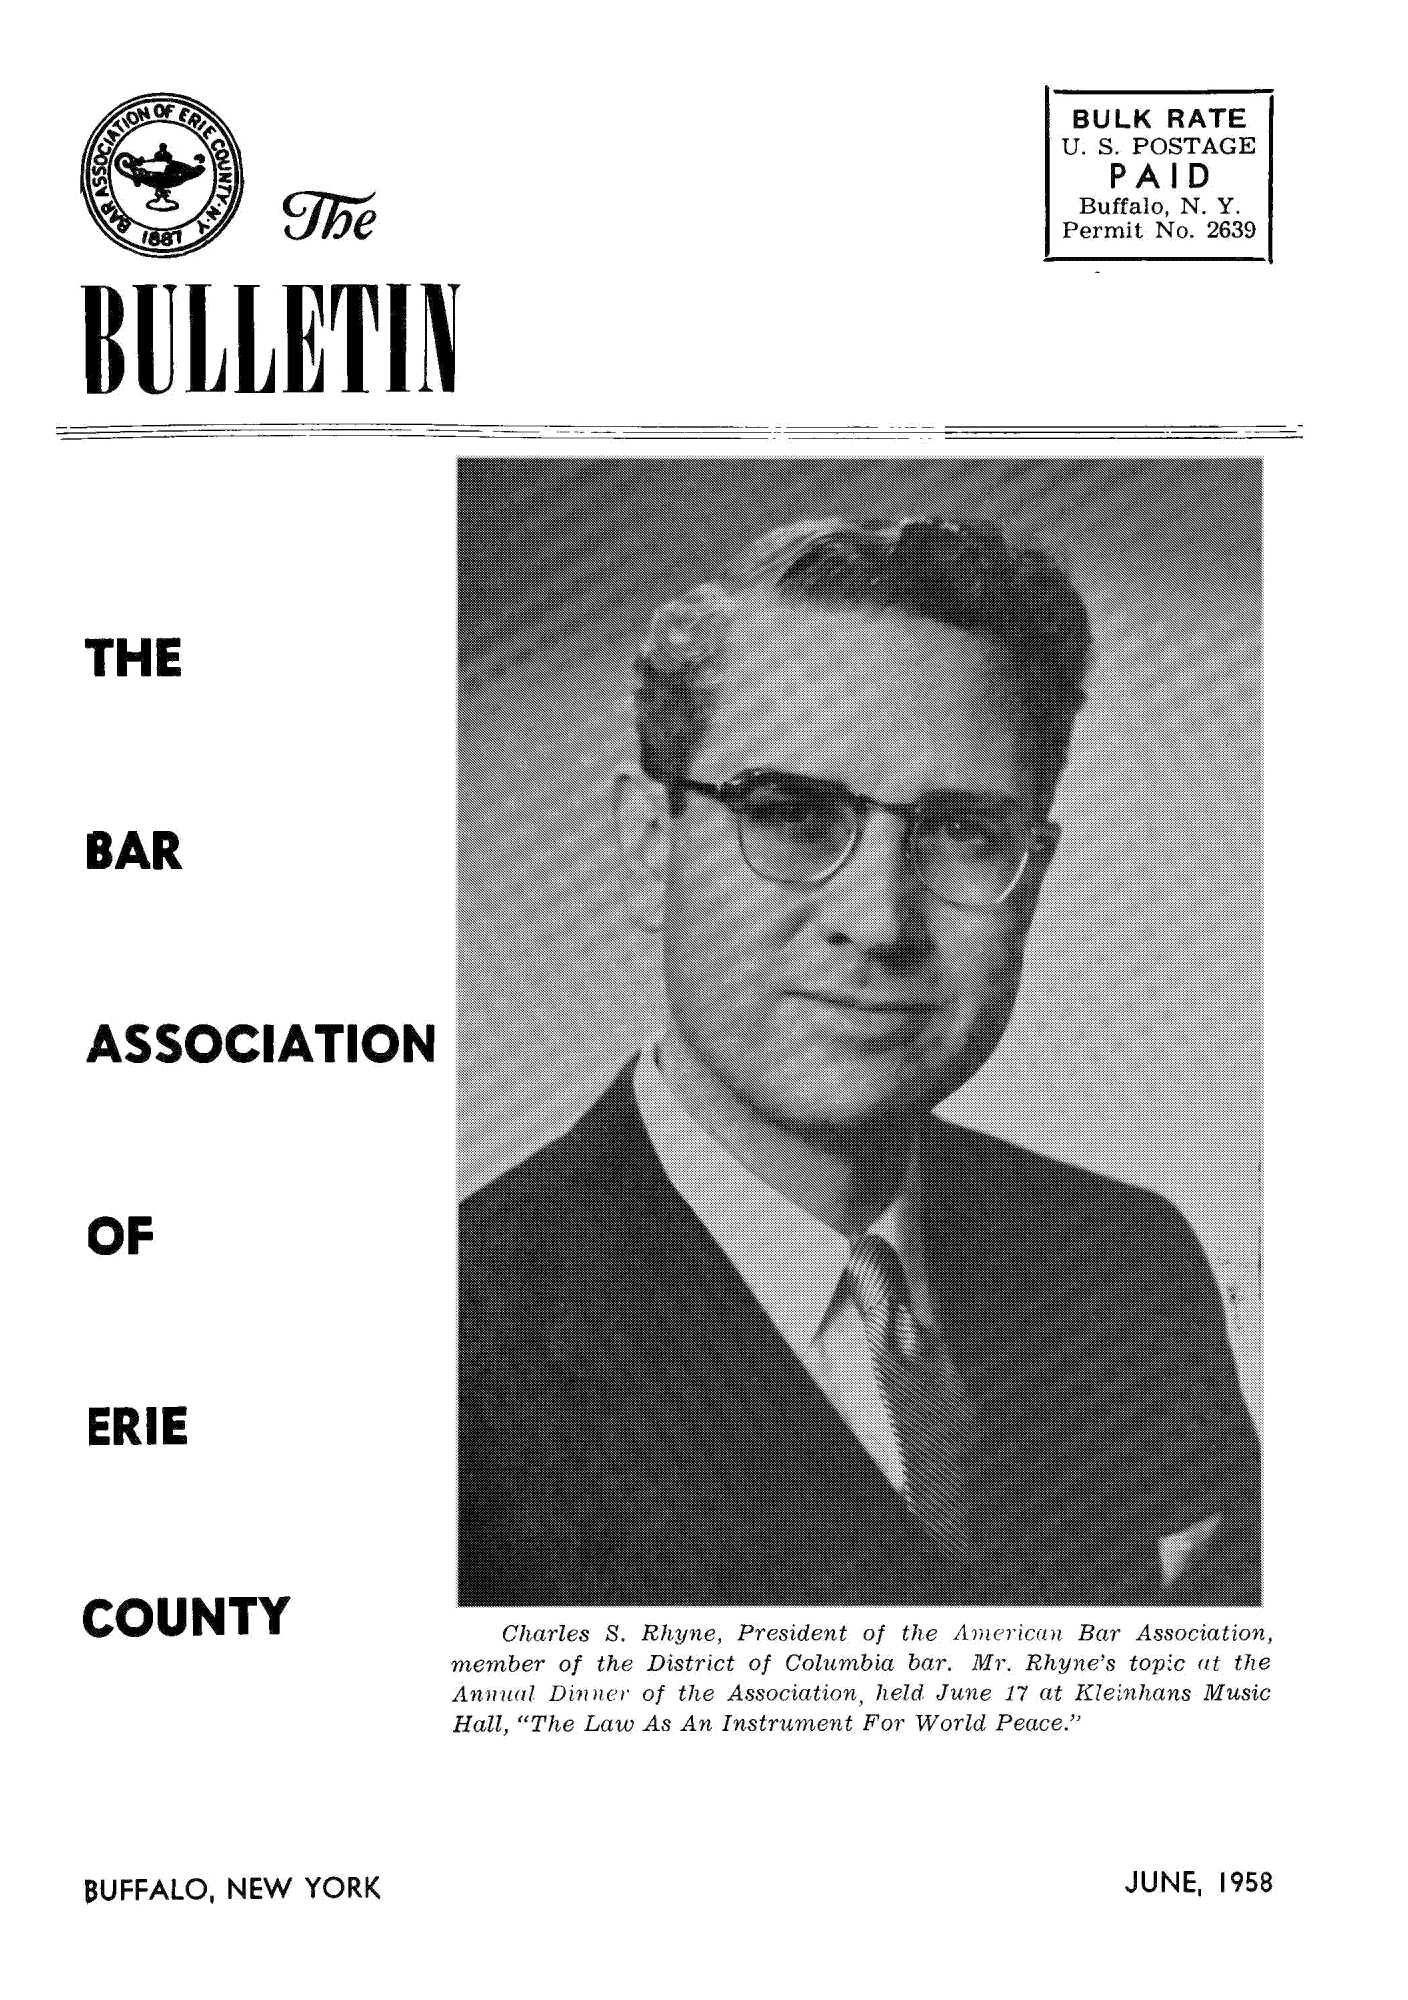 handle is hein.baecl/buetin0002 and id is 1 raw text is: etc

BULK RATE
U.S. POSTAGE
P AID
Buffalo, N.Y.
Permit No. 2639

BULLETlIN

THE
BAR
ASSOCIATION
OF
ERIE

COUNTY

Charles S. Rhyne, President of the Anv eicon Bar Association,
member of the District of Columbia bar. Mr. Rhyme's topic at the
Annual DiOMc  of the Association, held June 17 at Kleinhans Music
Hall, The Law As An Instrument For World Peace.'

JUNEI 1958

BUFFALO, NEW YORK


